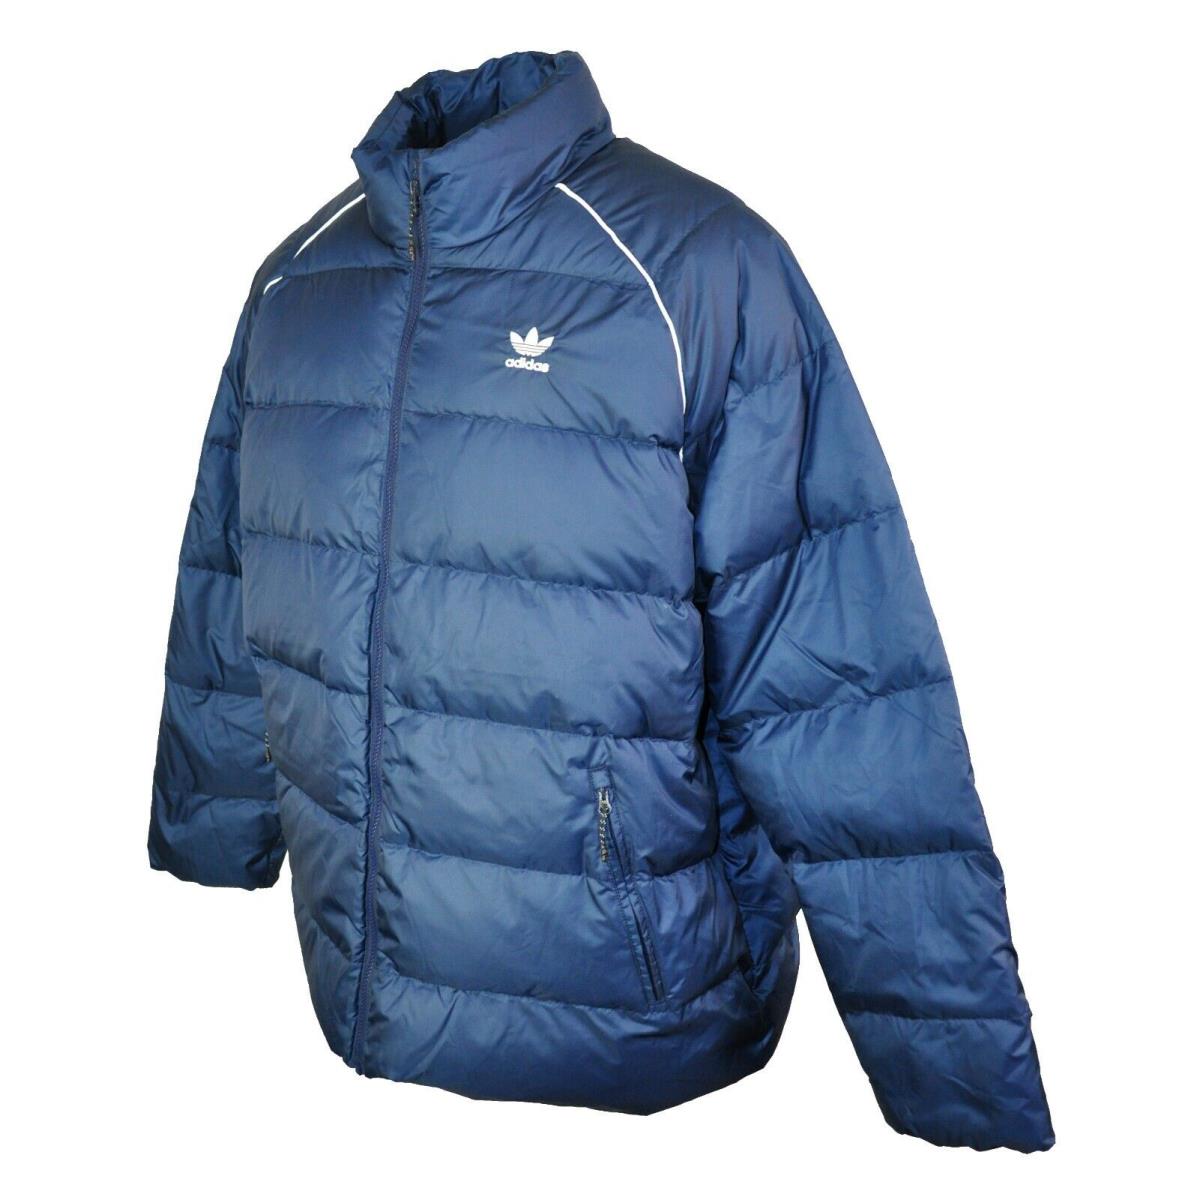 Adidas Puffer Down Jacket Men s Size 2XL Collegiate Navy Quilted